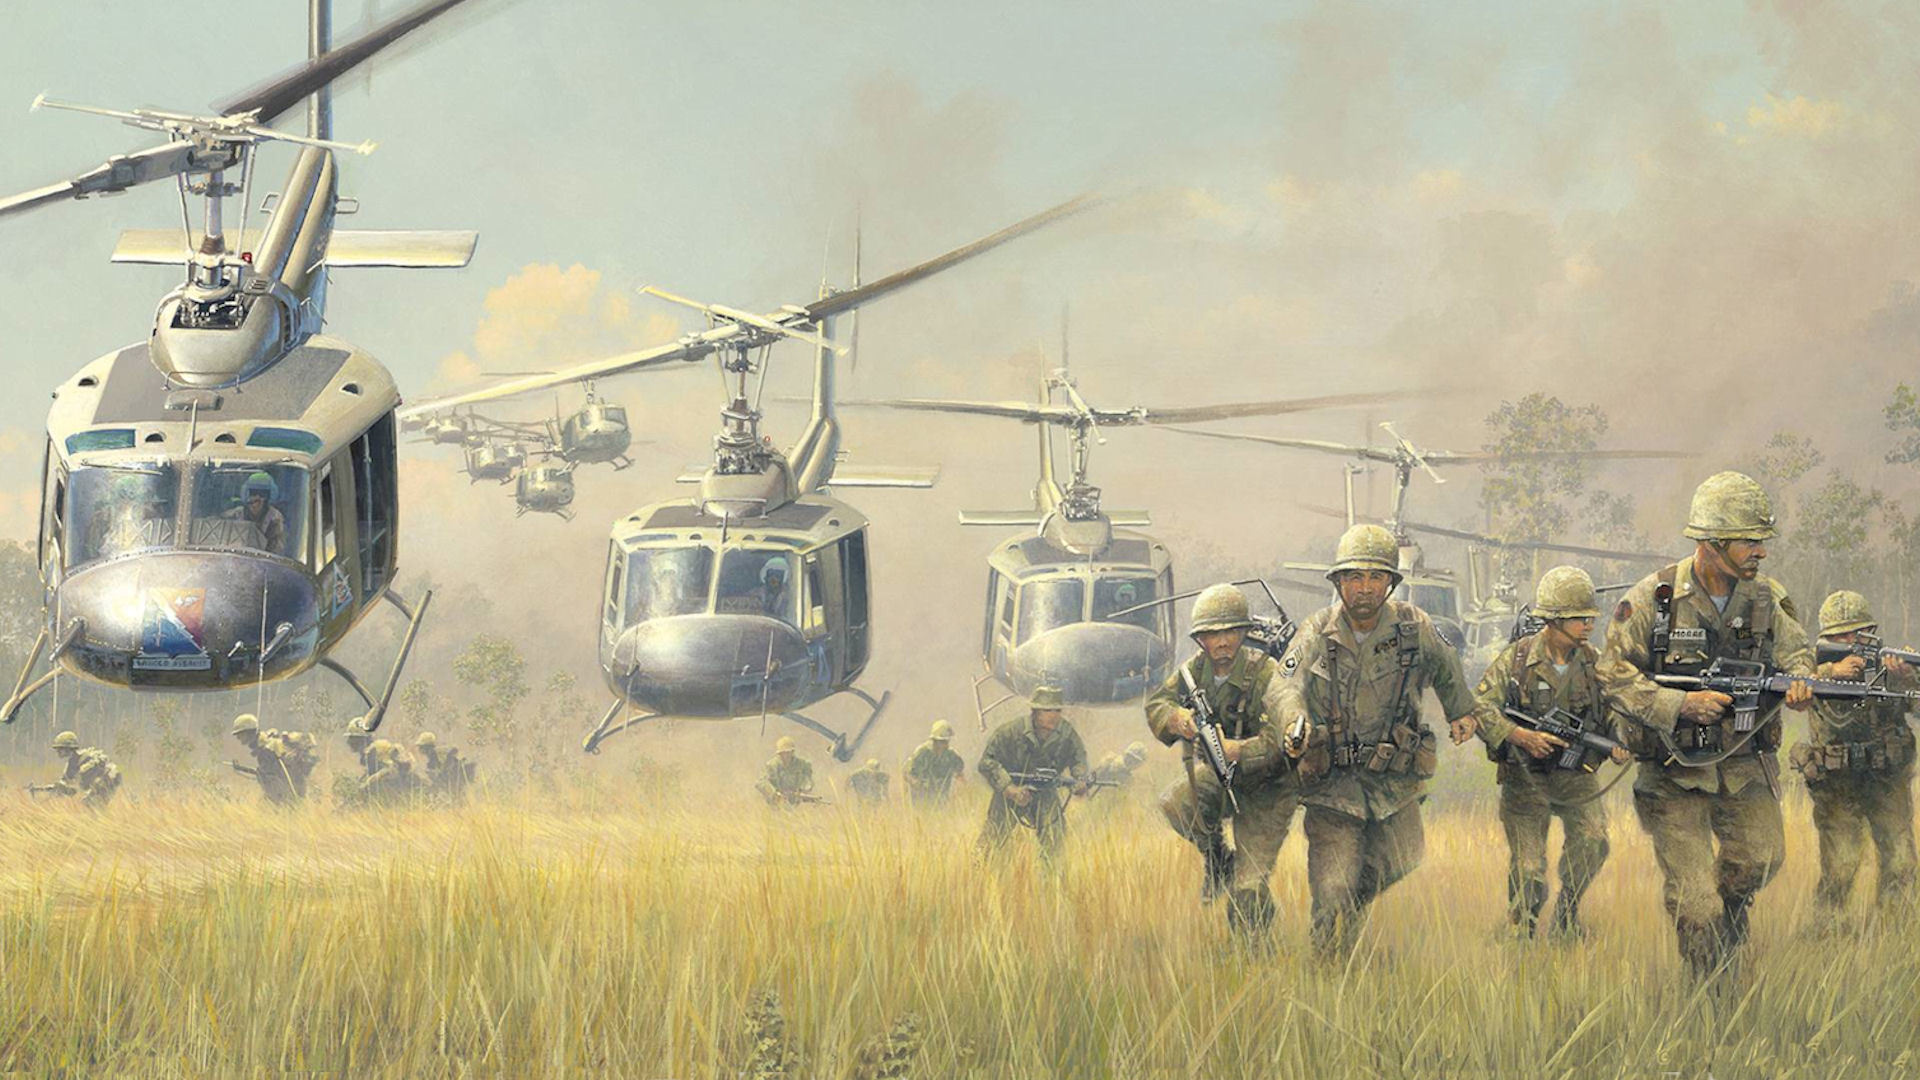 Huey Helicopters War Landing Cavalry Wallpaper Photos Pictures